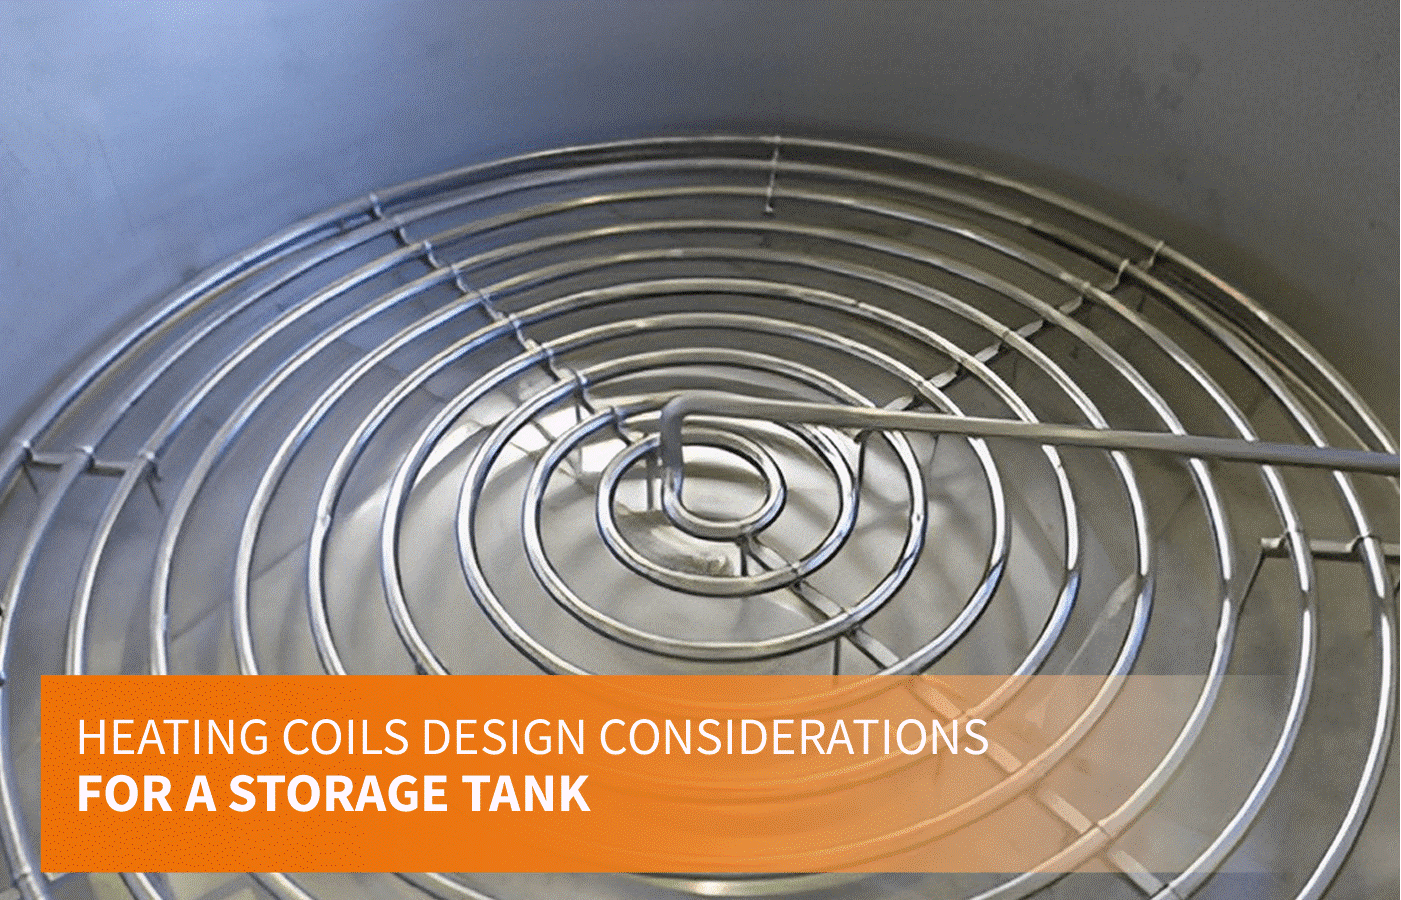 Heating Coils Design Considerations for a Storage Tank